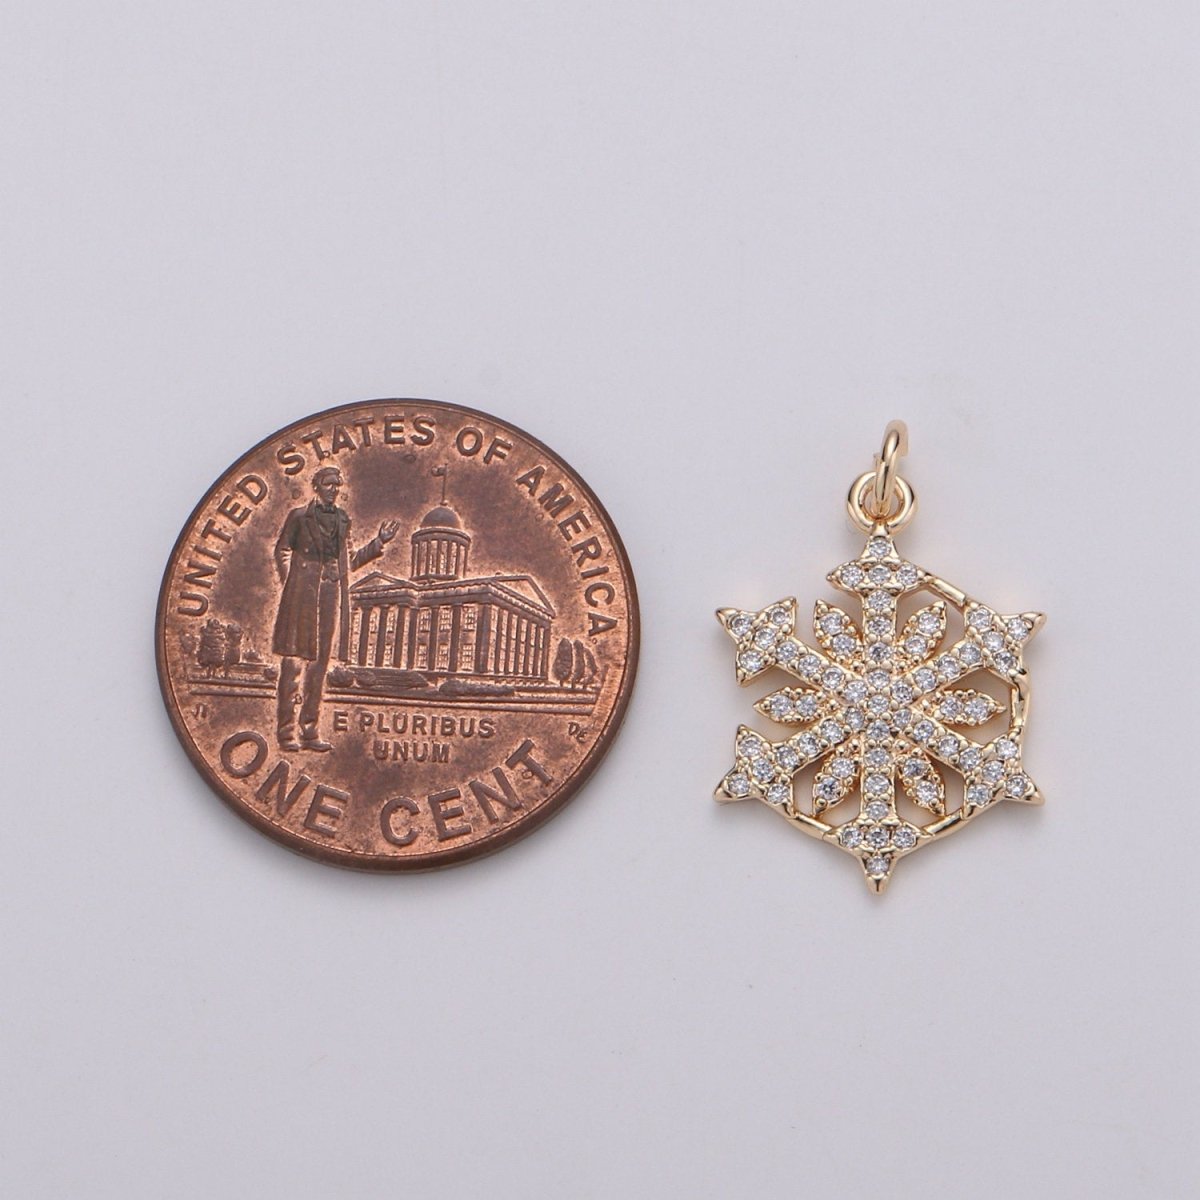 24K Gold Filled Snow Flake Charm Micro Pave Snow Charm, Northstar Cubic Charms, CZ Gold ClearCharm, Dainty Minimalist Jewelry Supply D-741 - DLUXCA